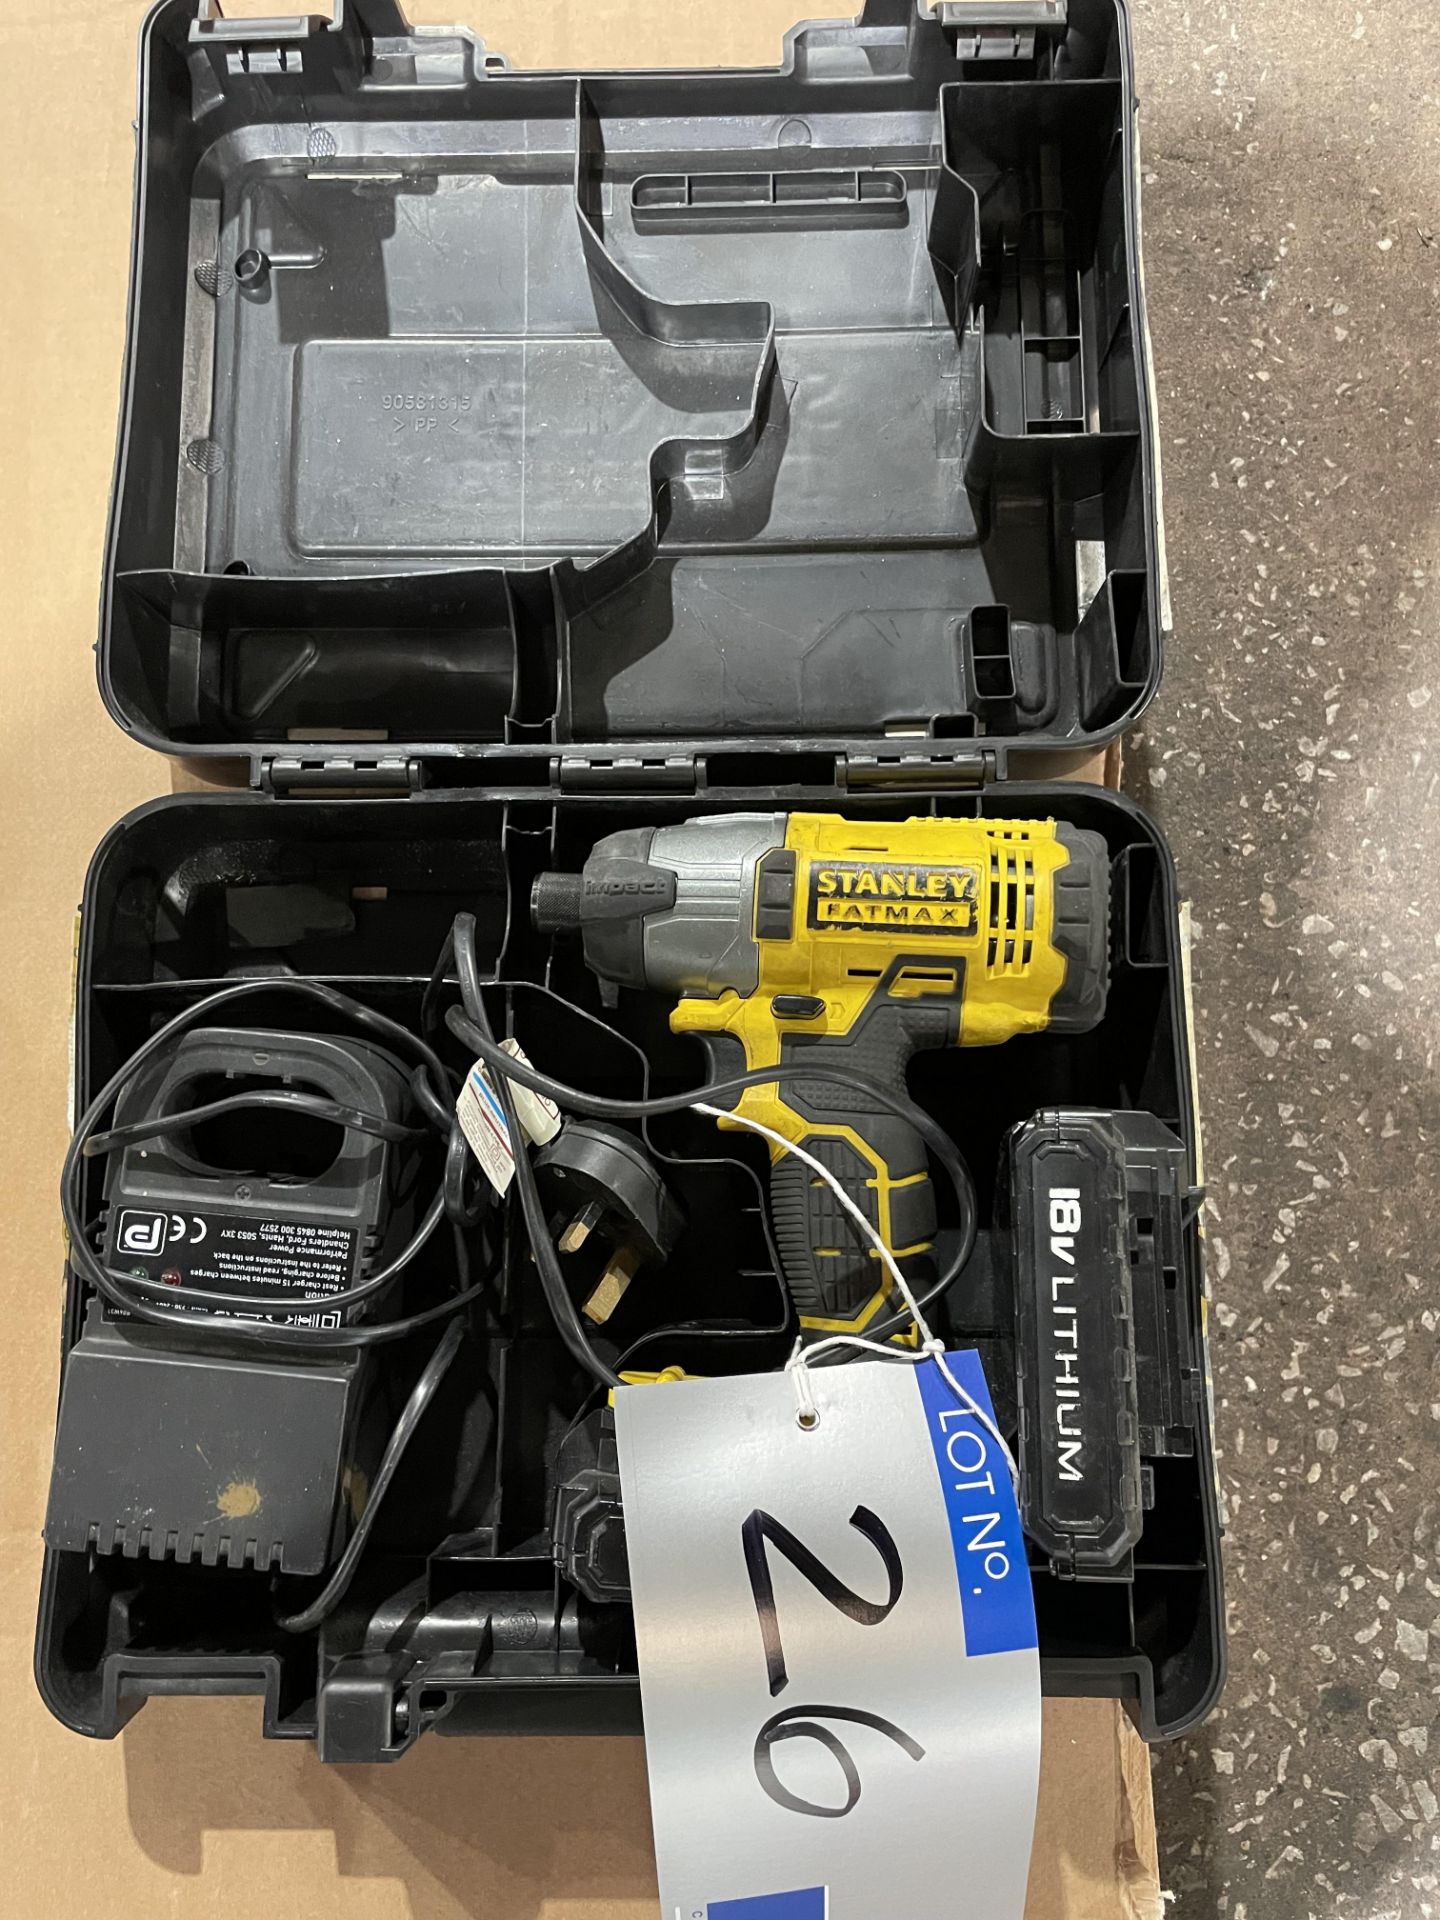 A Stanley FATMAX FMC641 Cordless Impact Driver with spare battery, charger and case.